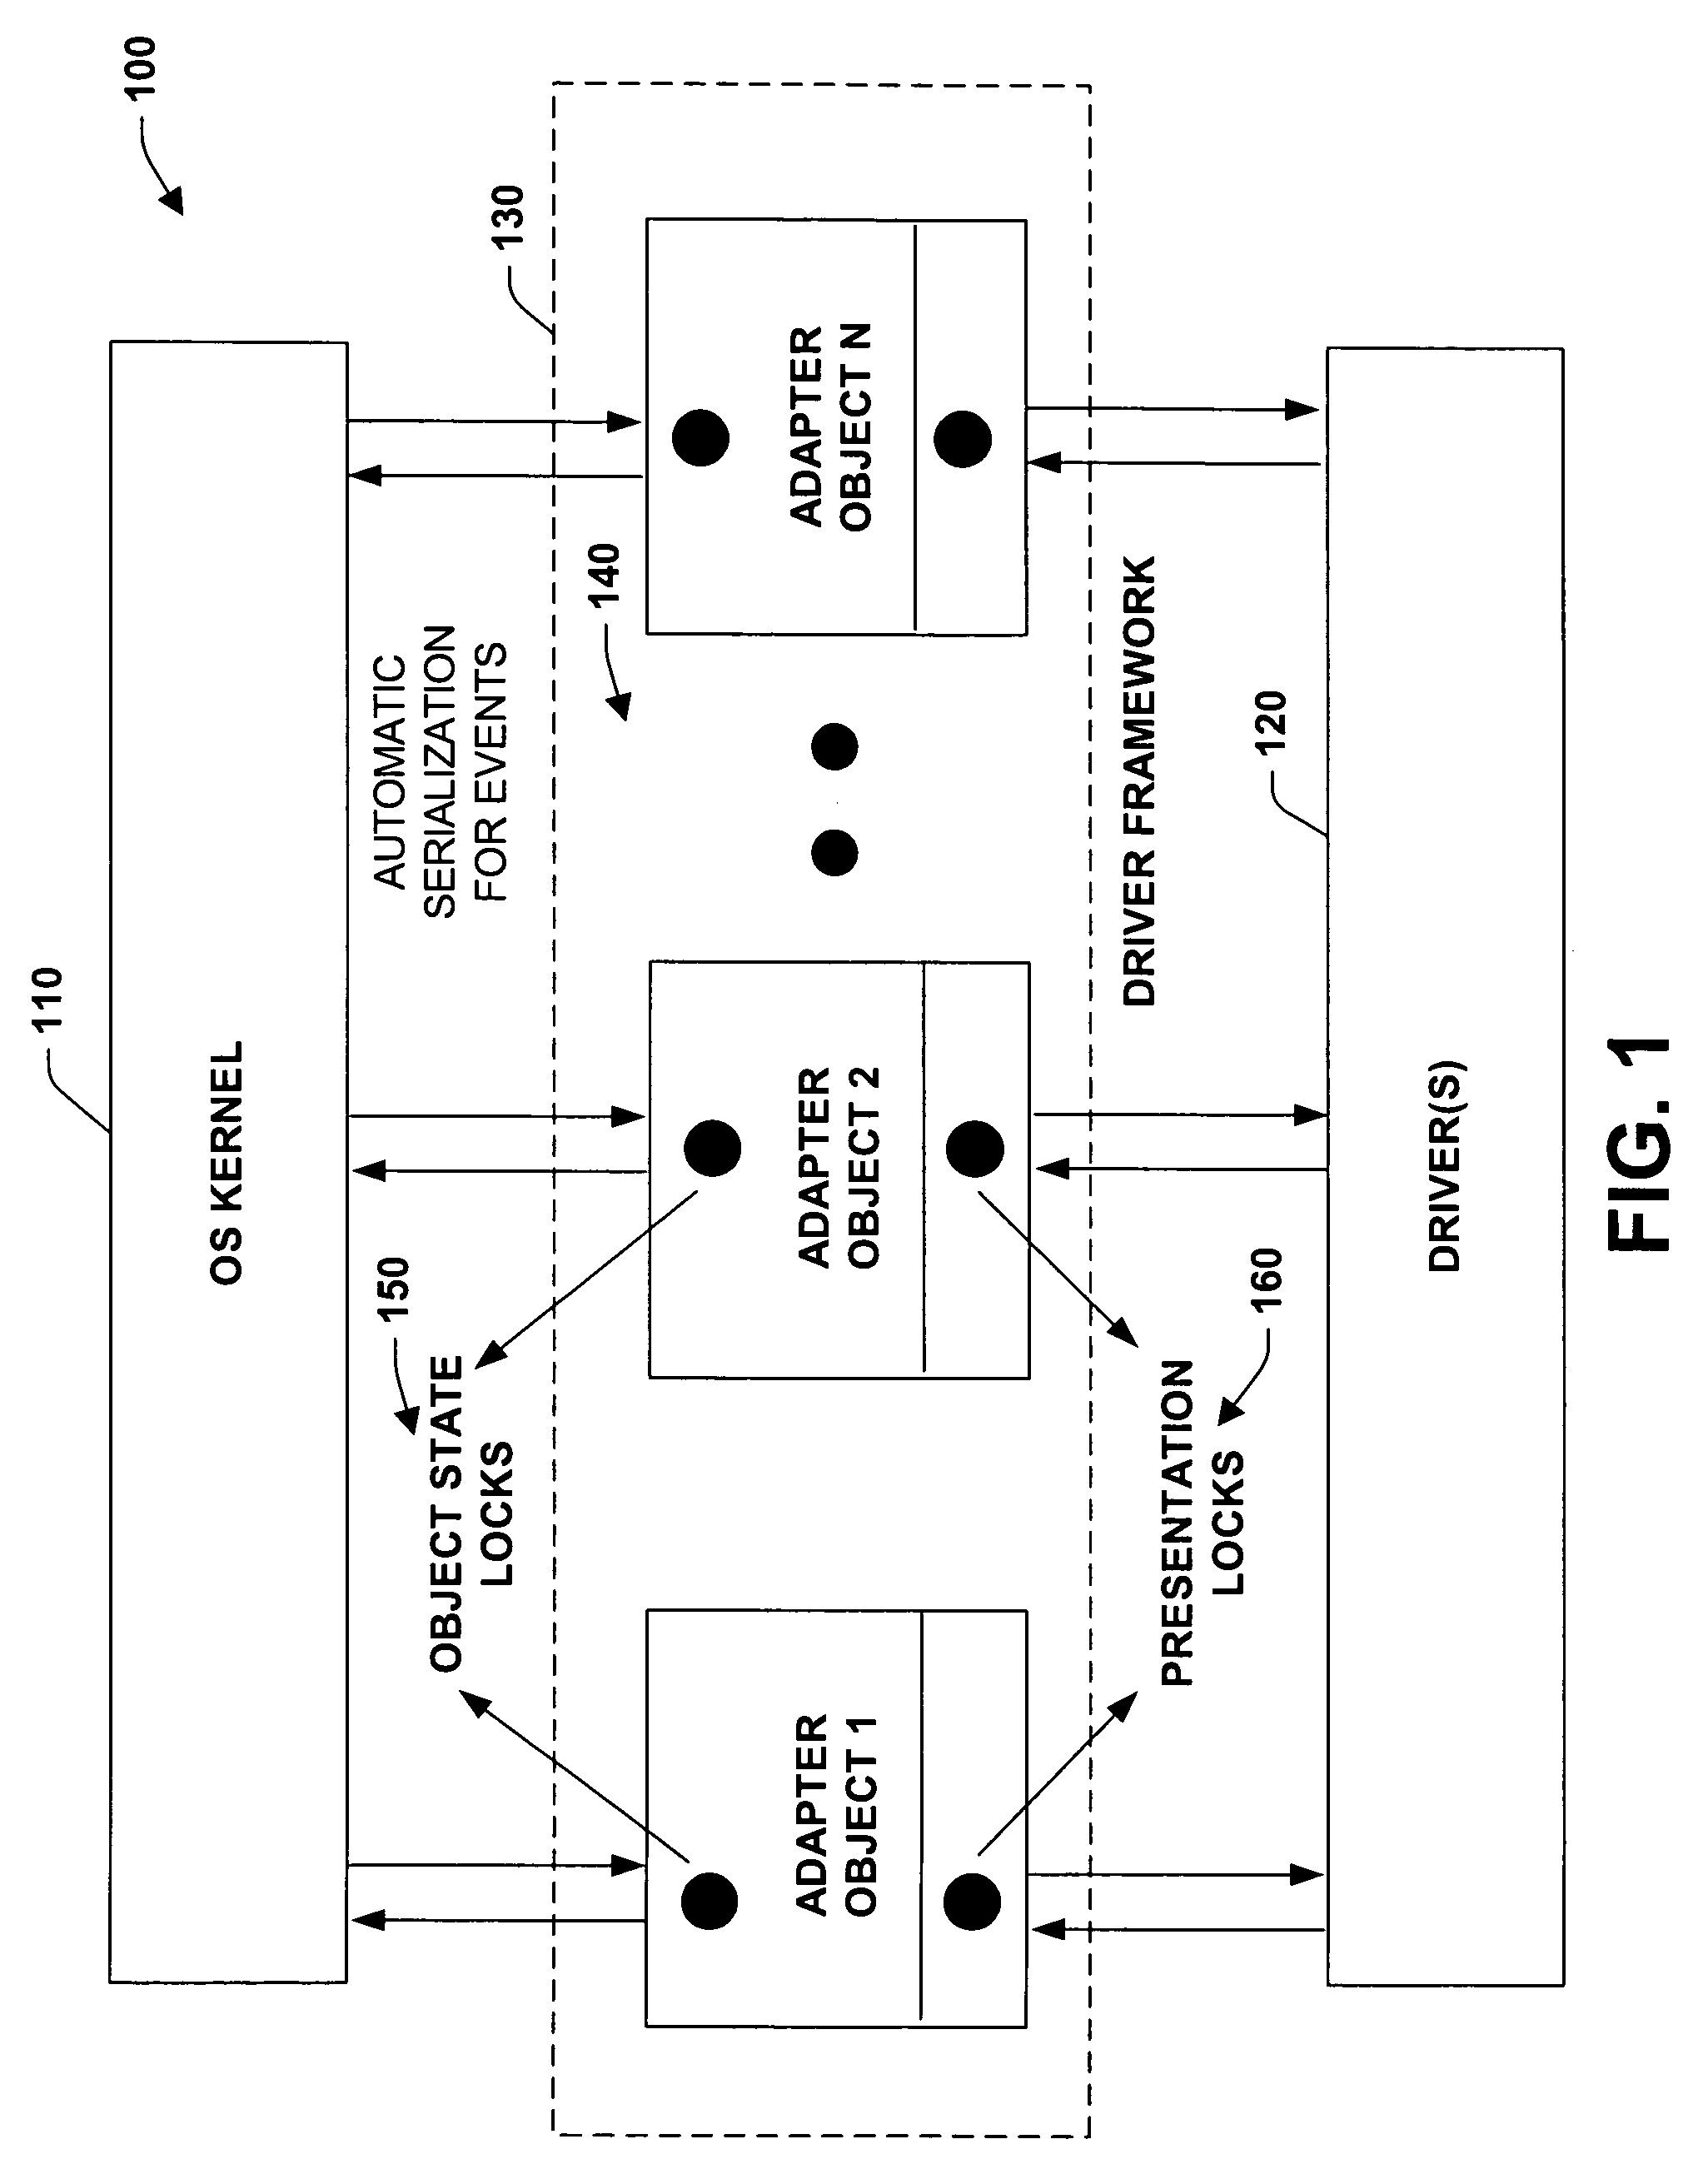 Driver framework component for synchronizing interactions between a multi-threaded environment and a driver operating in a less-threaded software environment